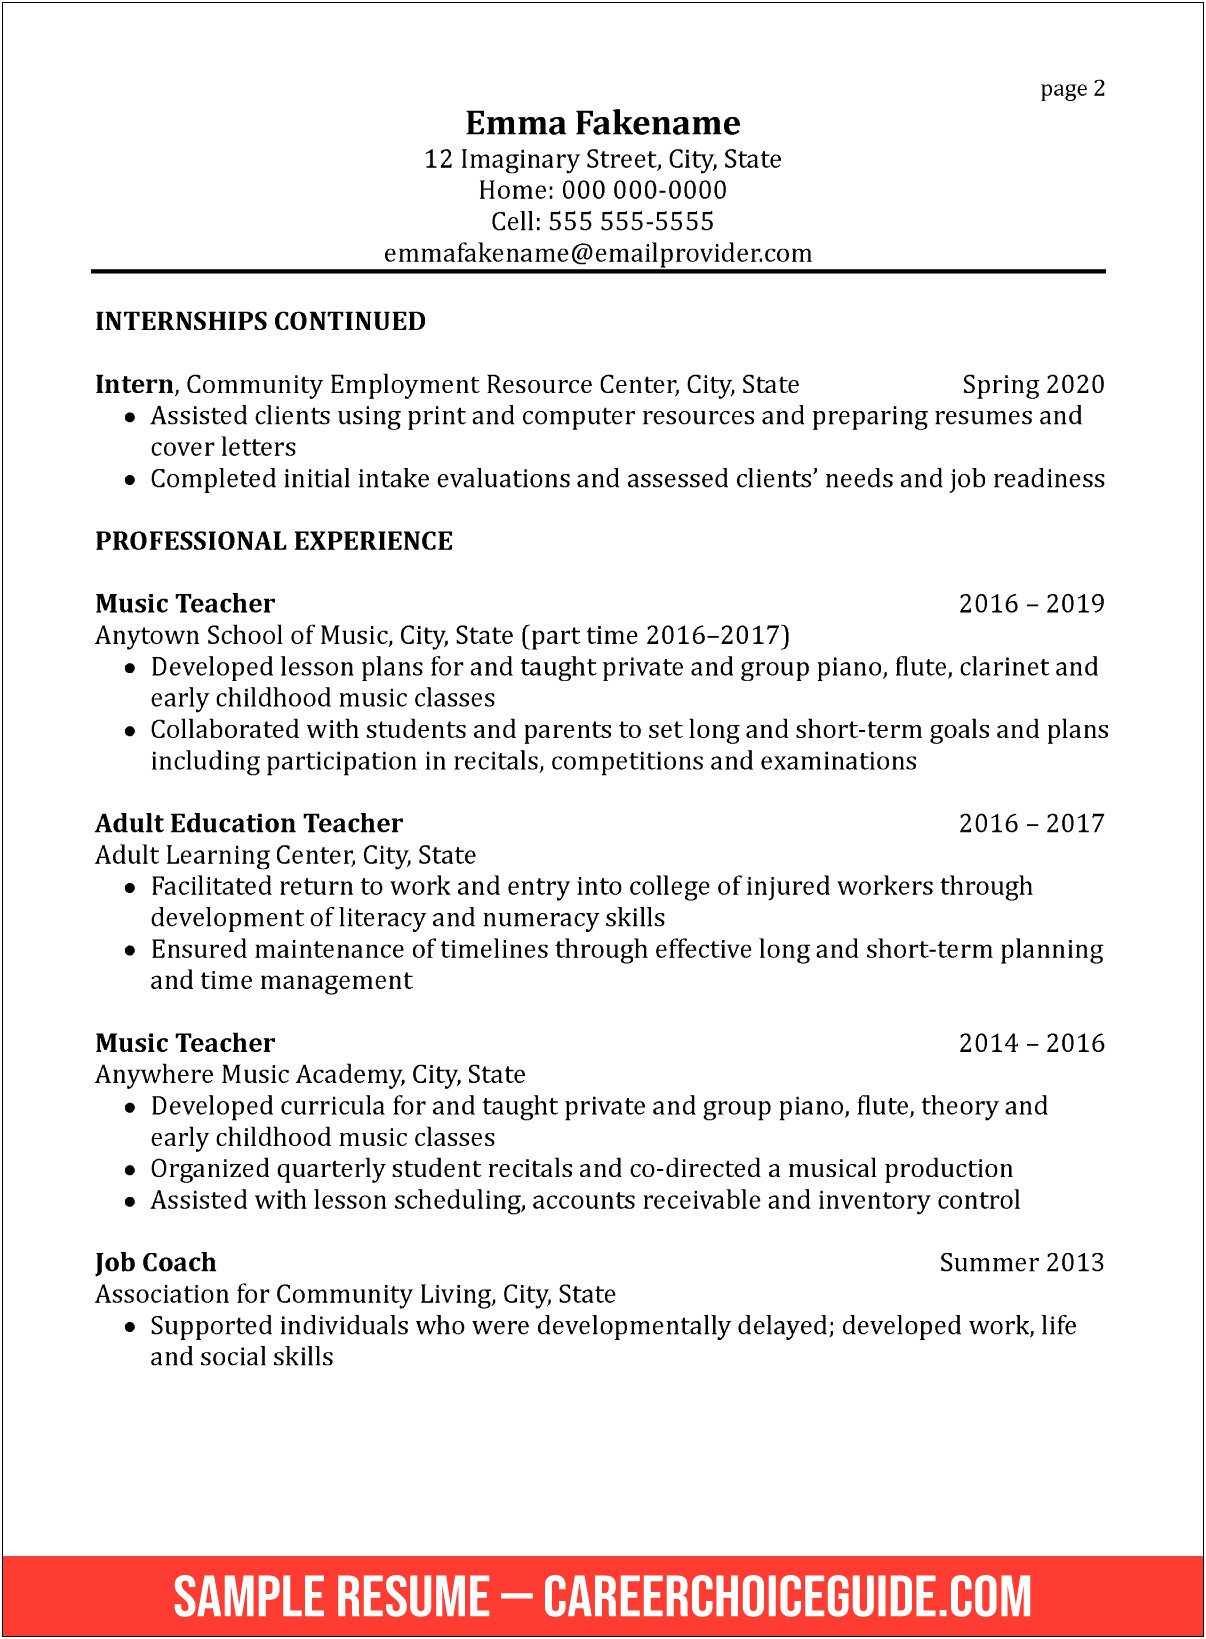 Examples Of Job Skills For A Resume